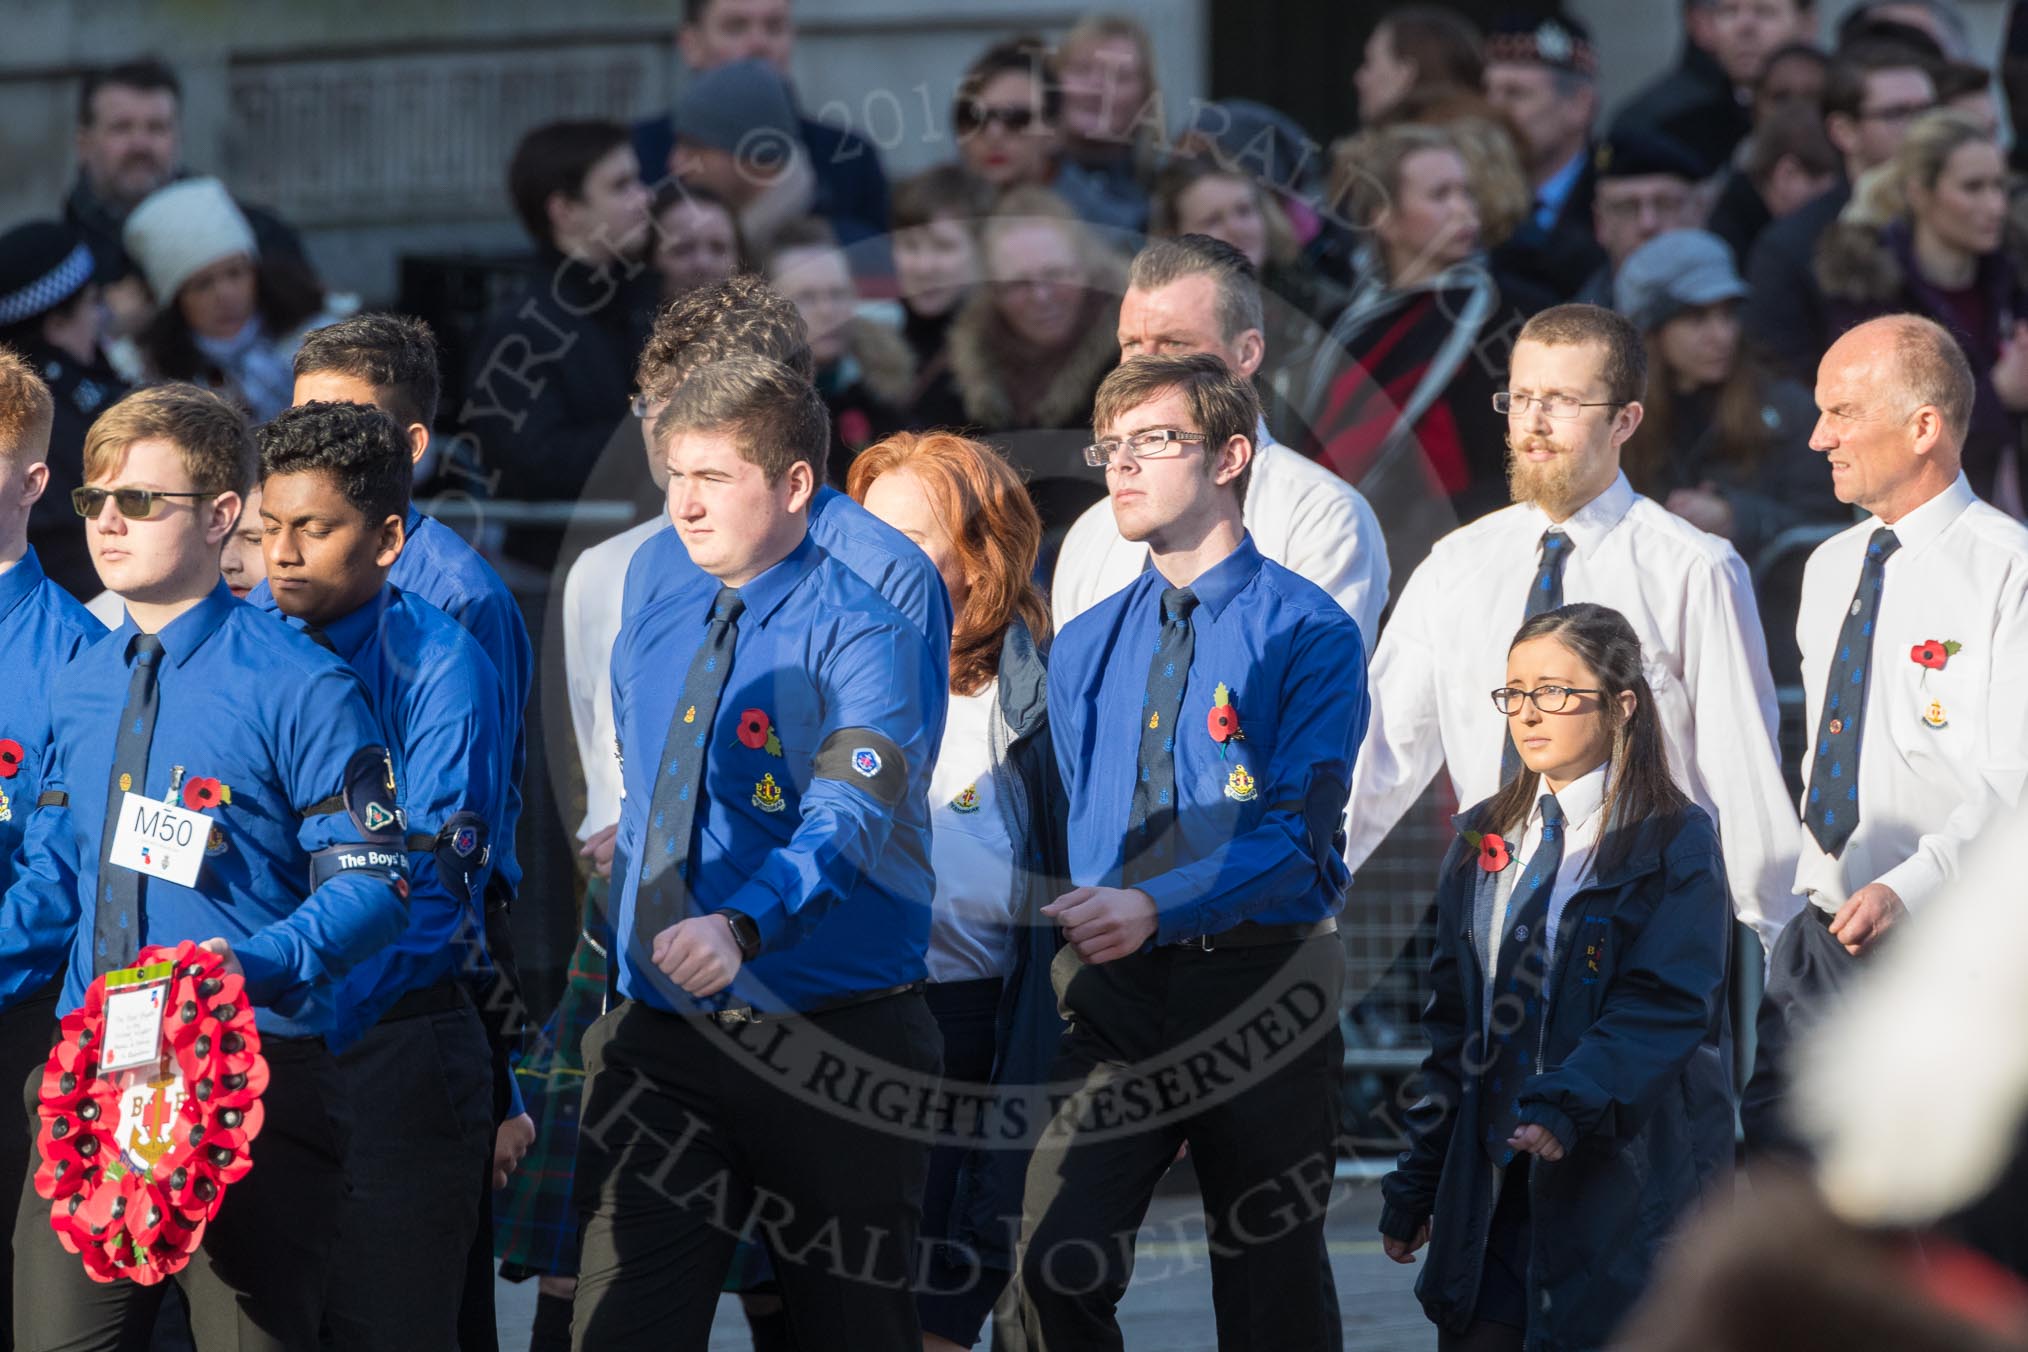 March Past, Remembrance Sunday at the Cenotaph 2016: M50 The Boys’ Brigade.
Cenotaph, Whitehall, London SW1,
London,
Greater London,
United Kingdom,
on 13 November 2016 at 13:20, image #3047